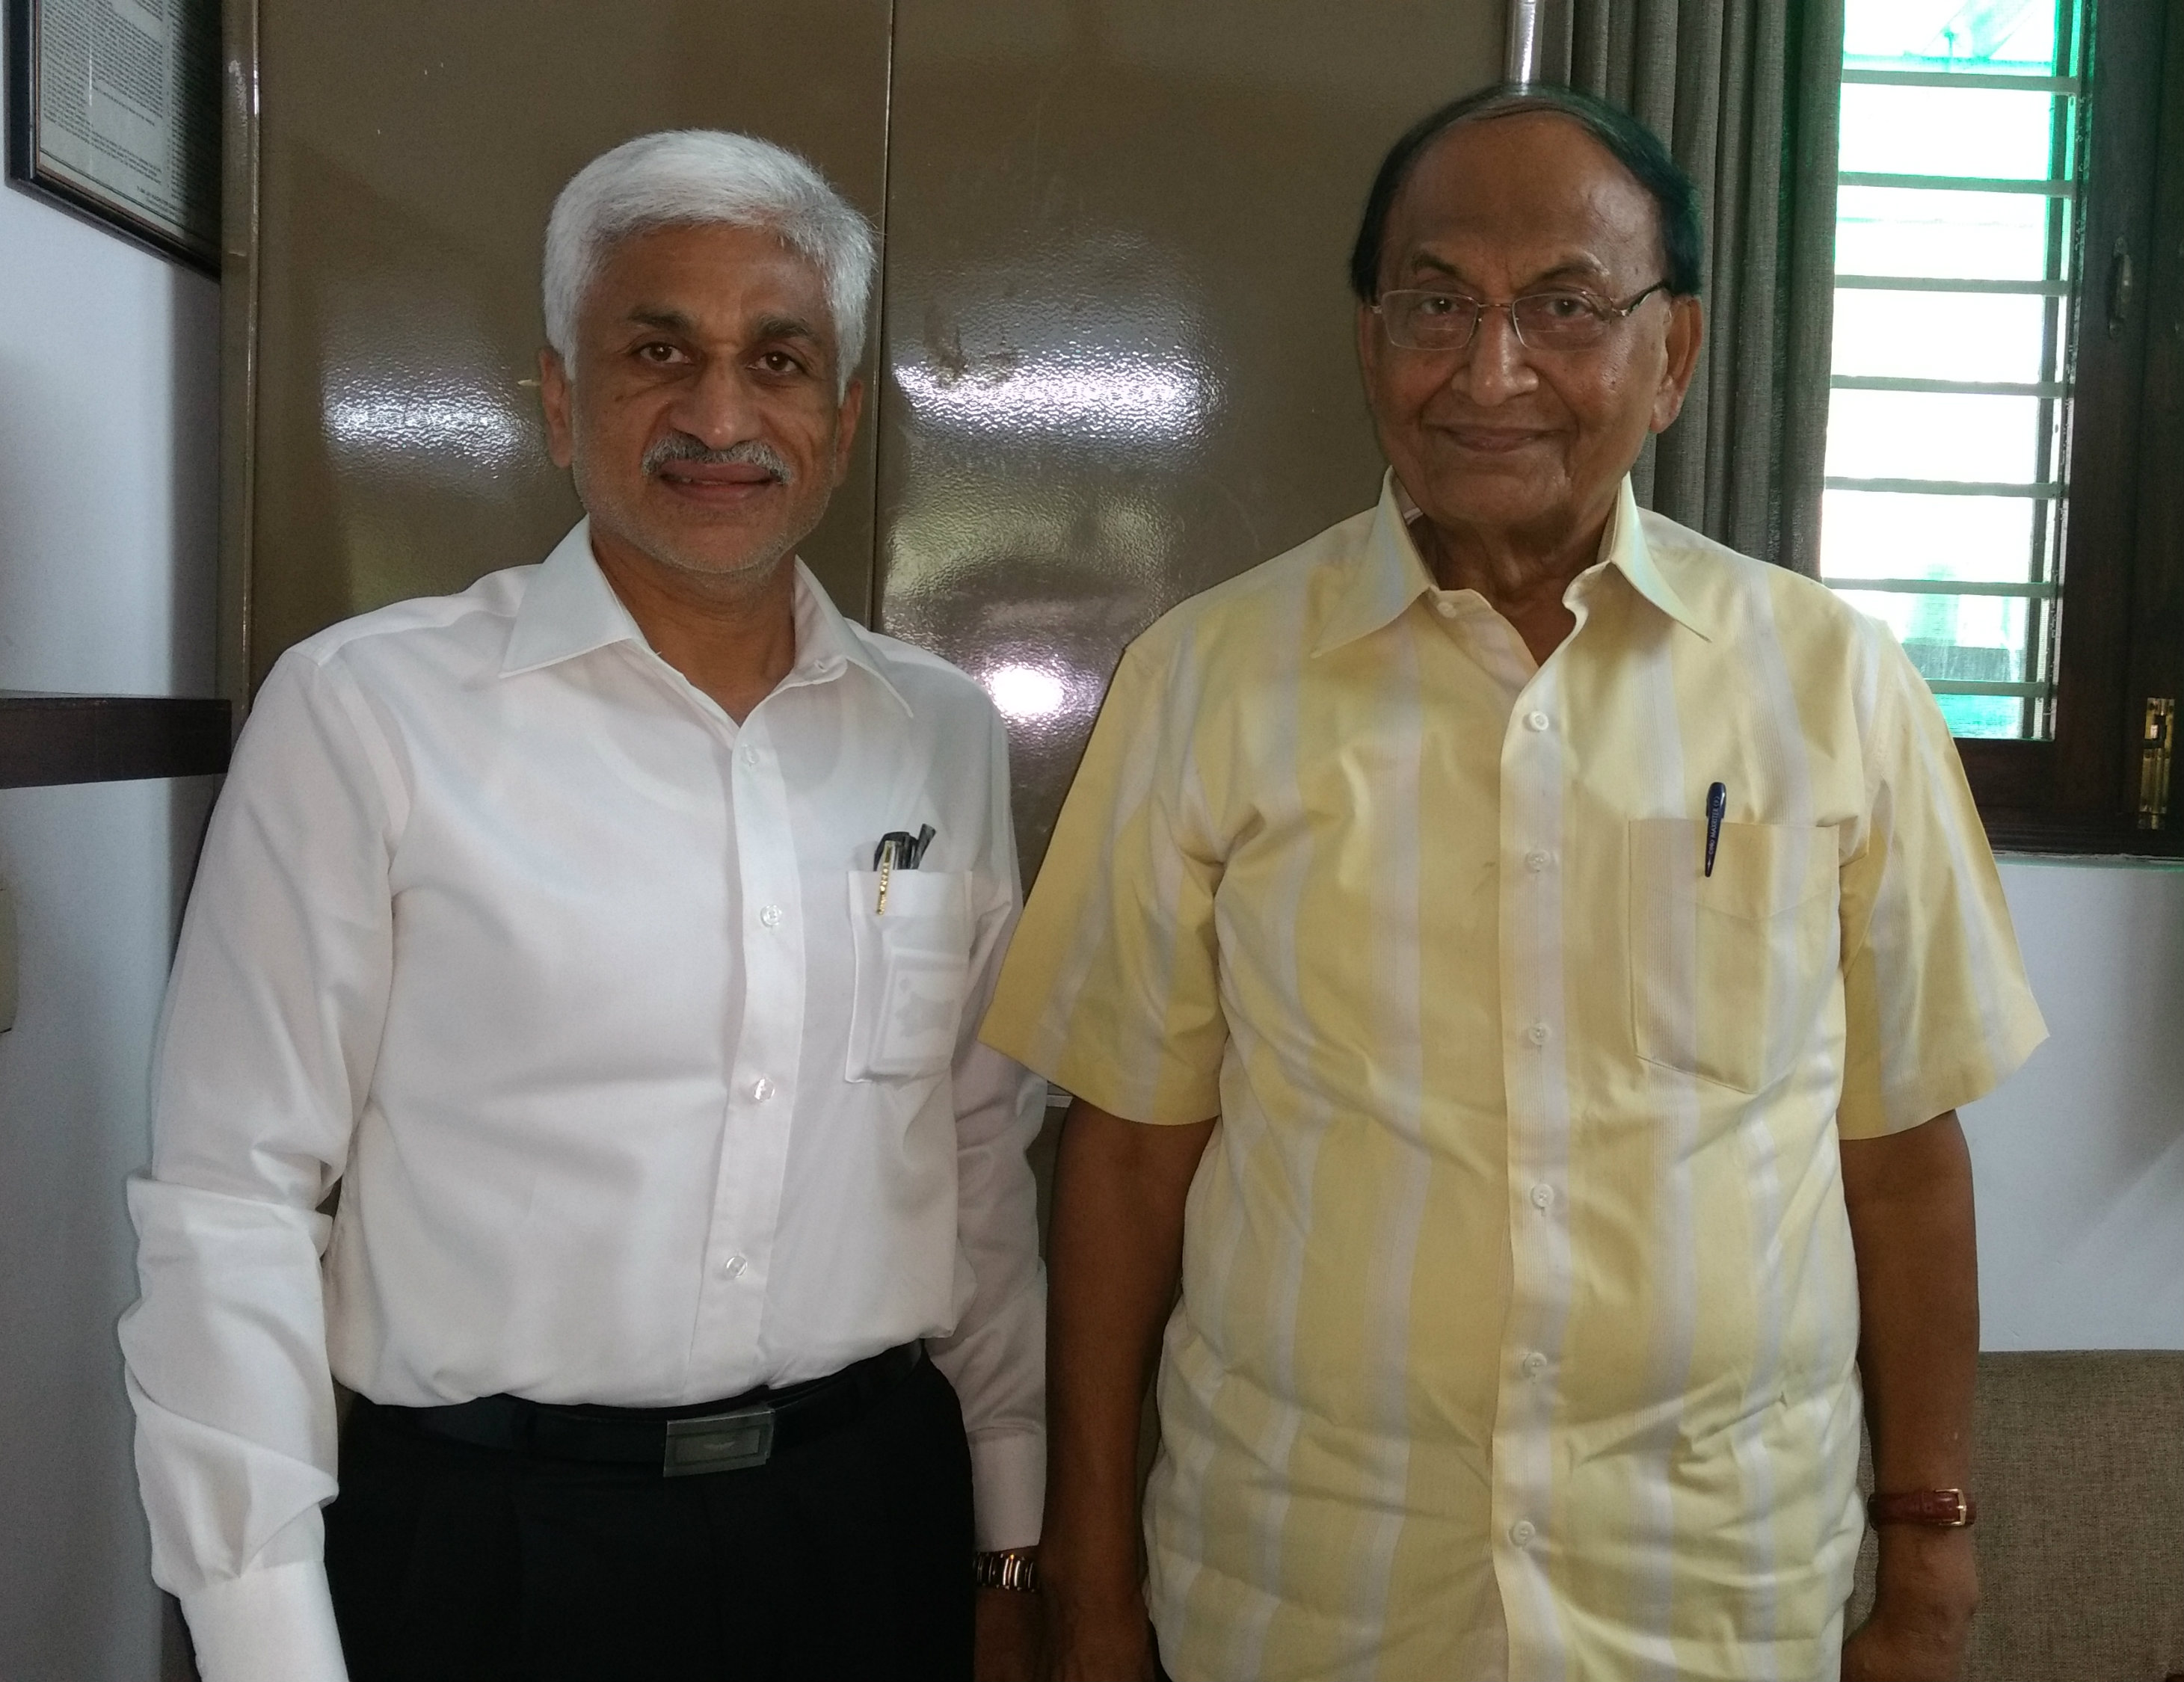 Meeting with a Legend I met Dr. C. P. Thakur,